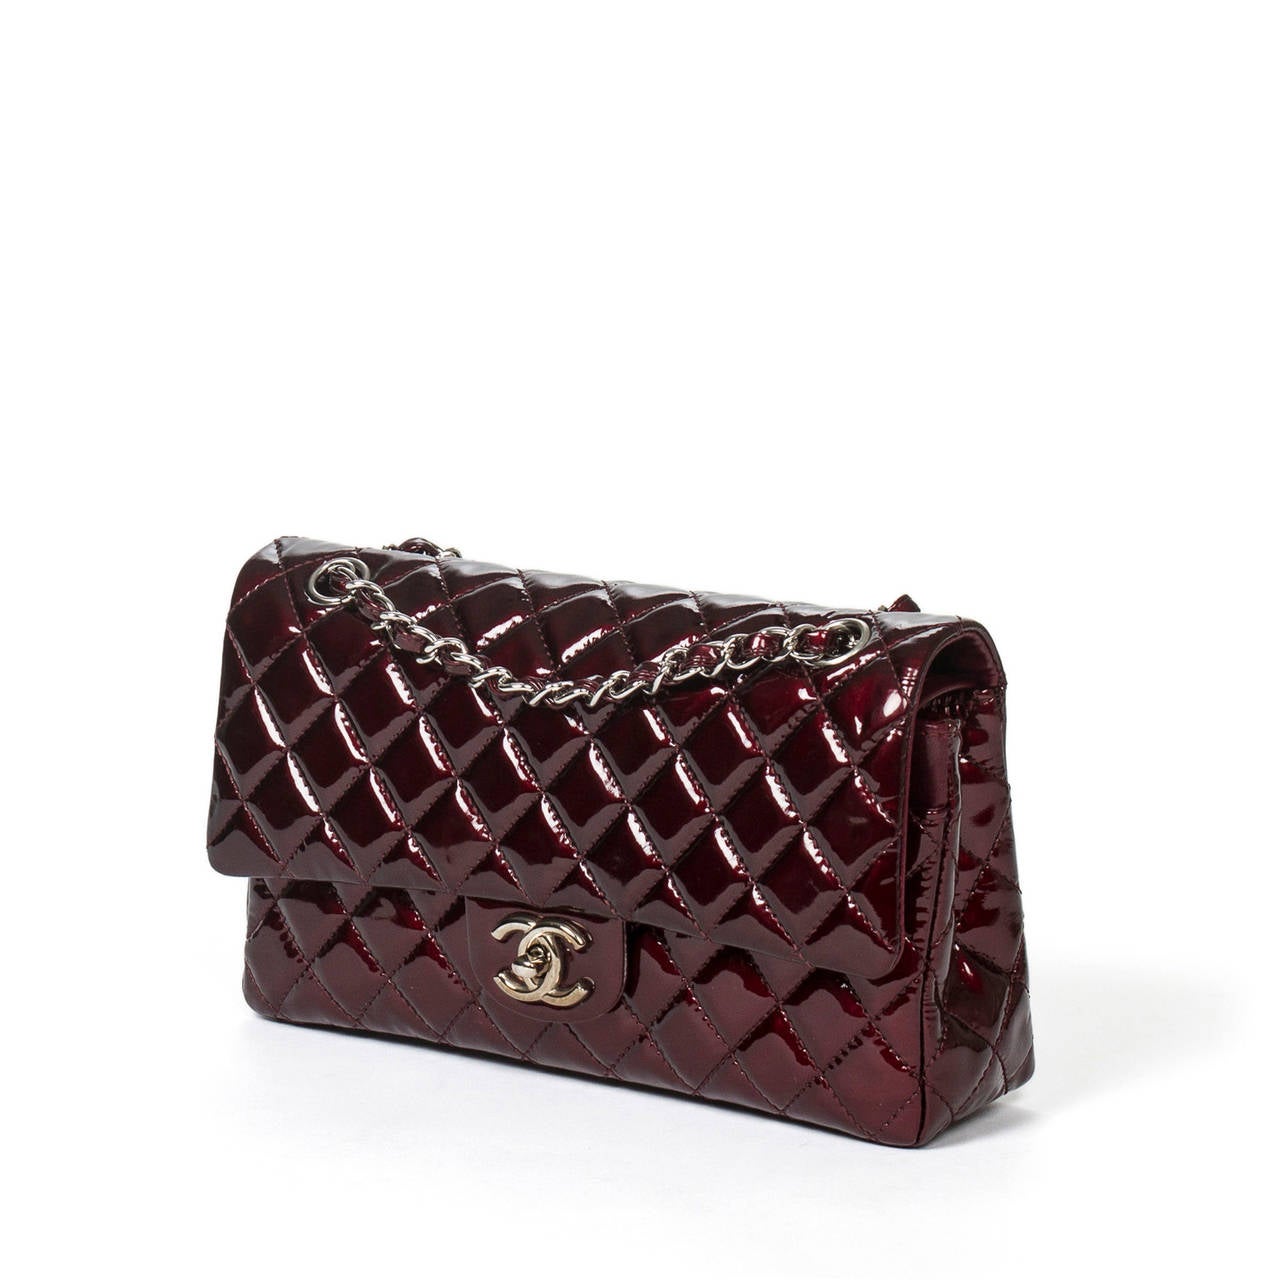 Classic flap in metallic burgundy quilted patent leather, double flap, double chain strap interlaced with leather, CC turnlock, slip back pocket and silver hardware. Burgundy leather lining with 3 slip pockets.